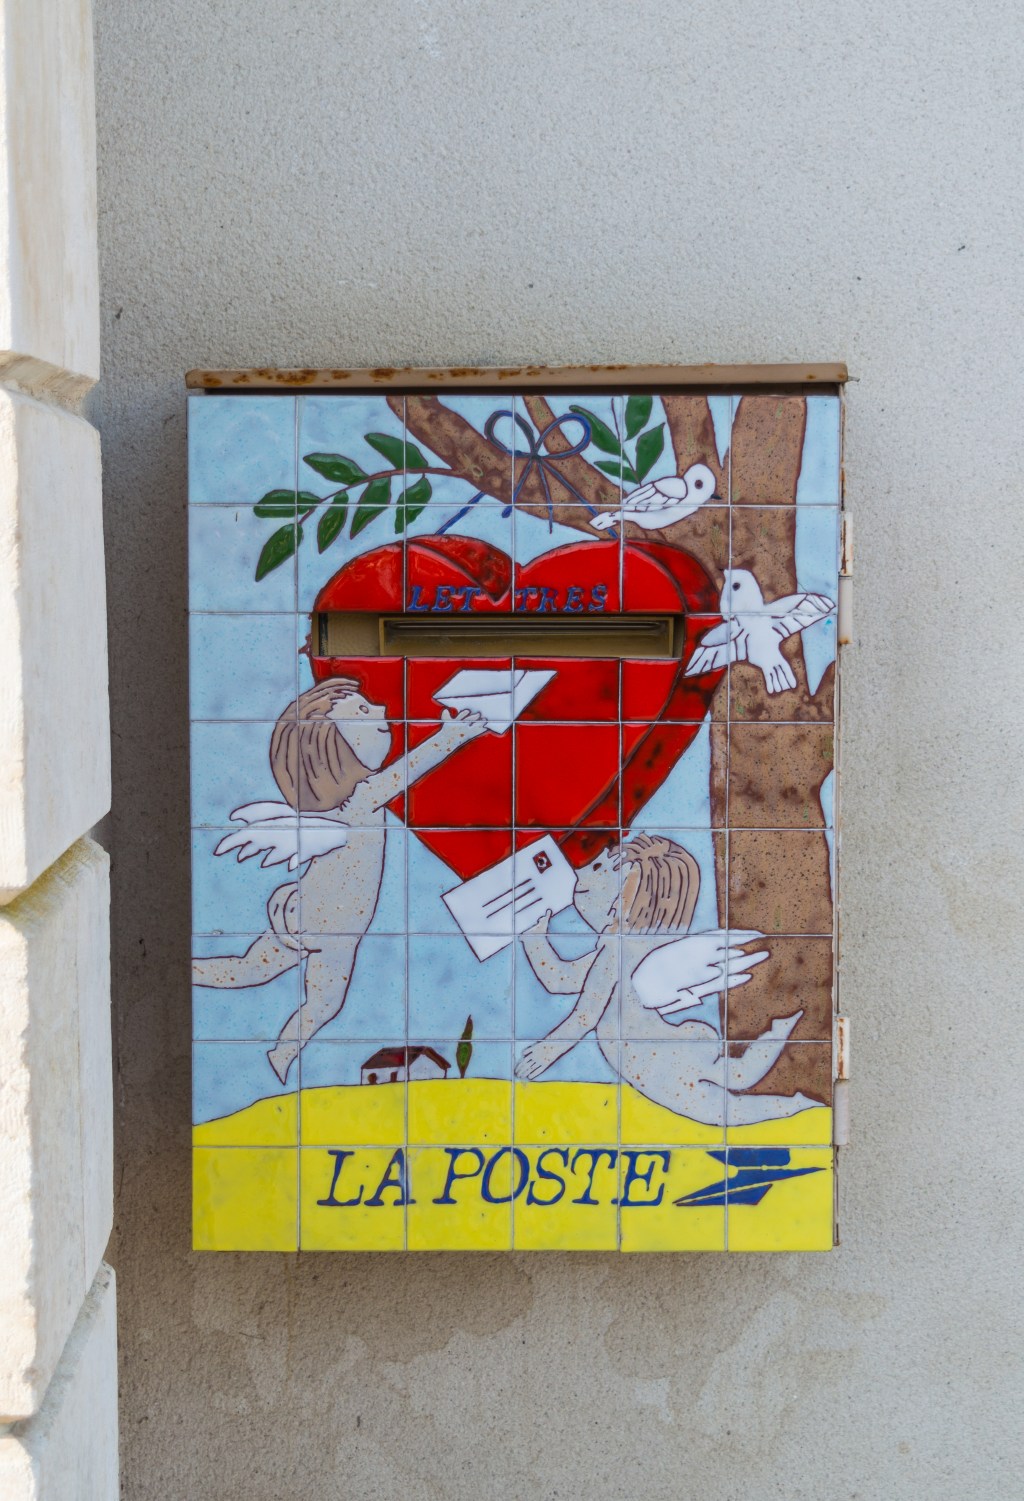 stamp issues by post office in Saint-Valentin